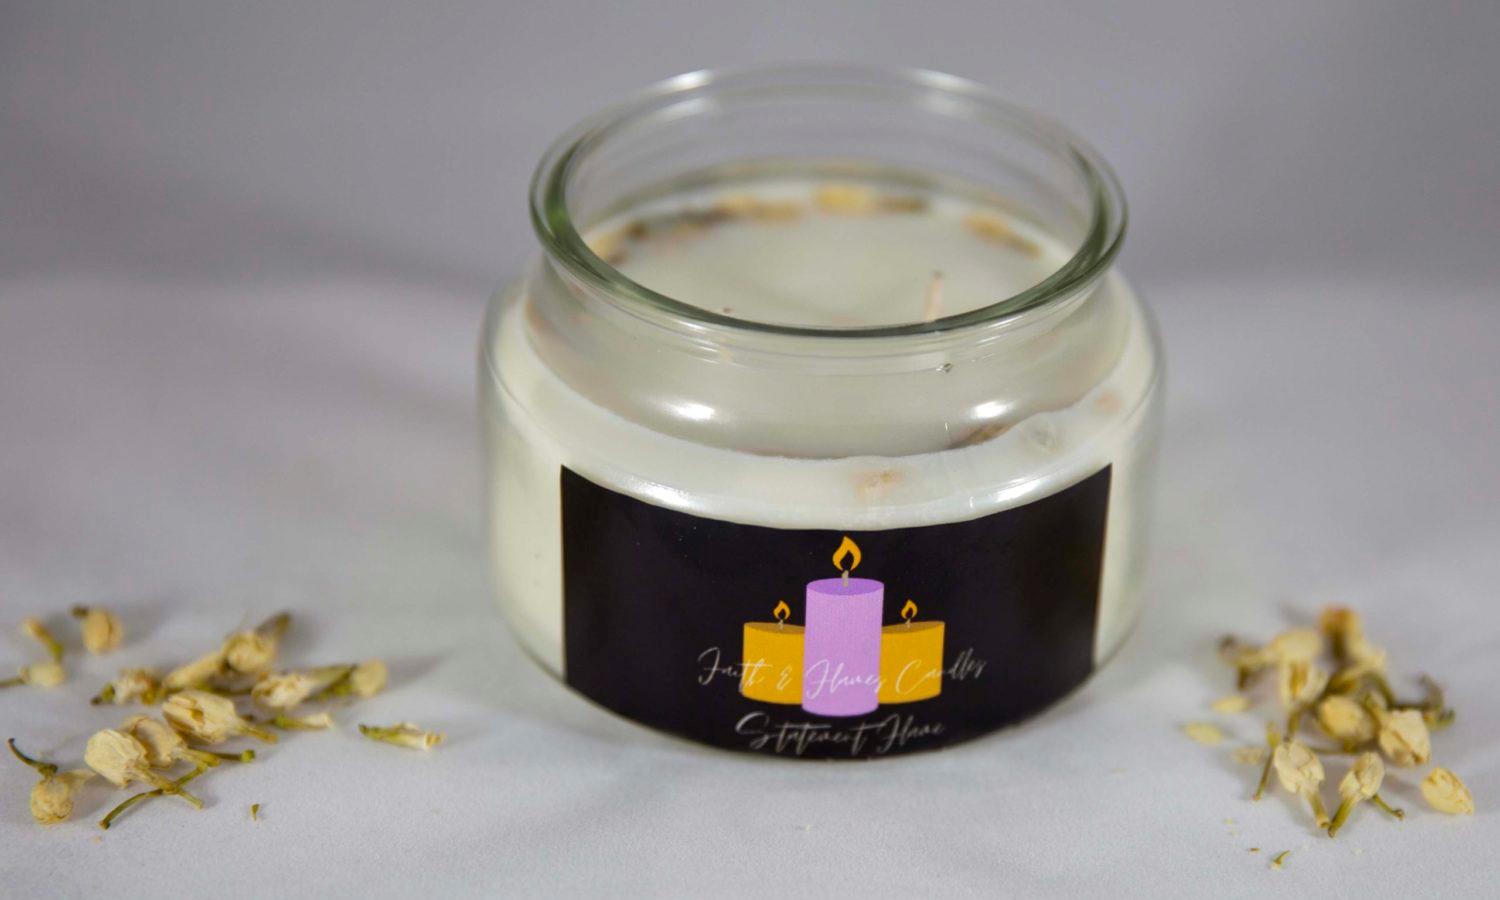 The Statement Flame features a blend of cedarwood, sandalwood, rosewood, and jasmine to create a grounding blend that promotes emotional balance and spiritual healing to help you focus on your goals. Use the Statement Flame for prayer, petitions, affirmations, and declarations.